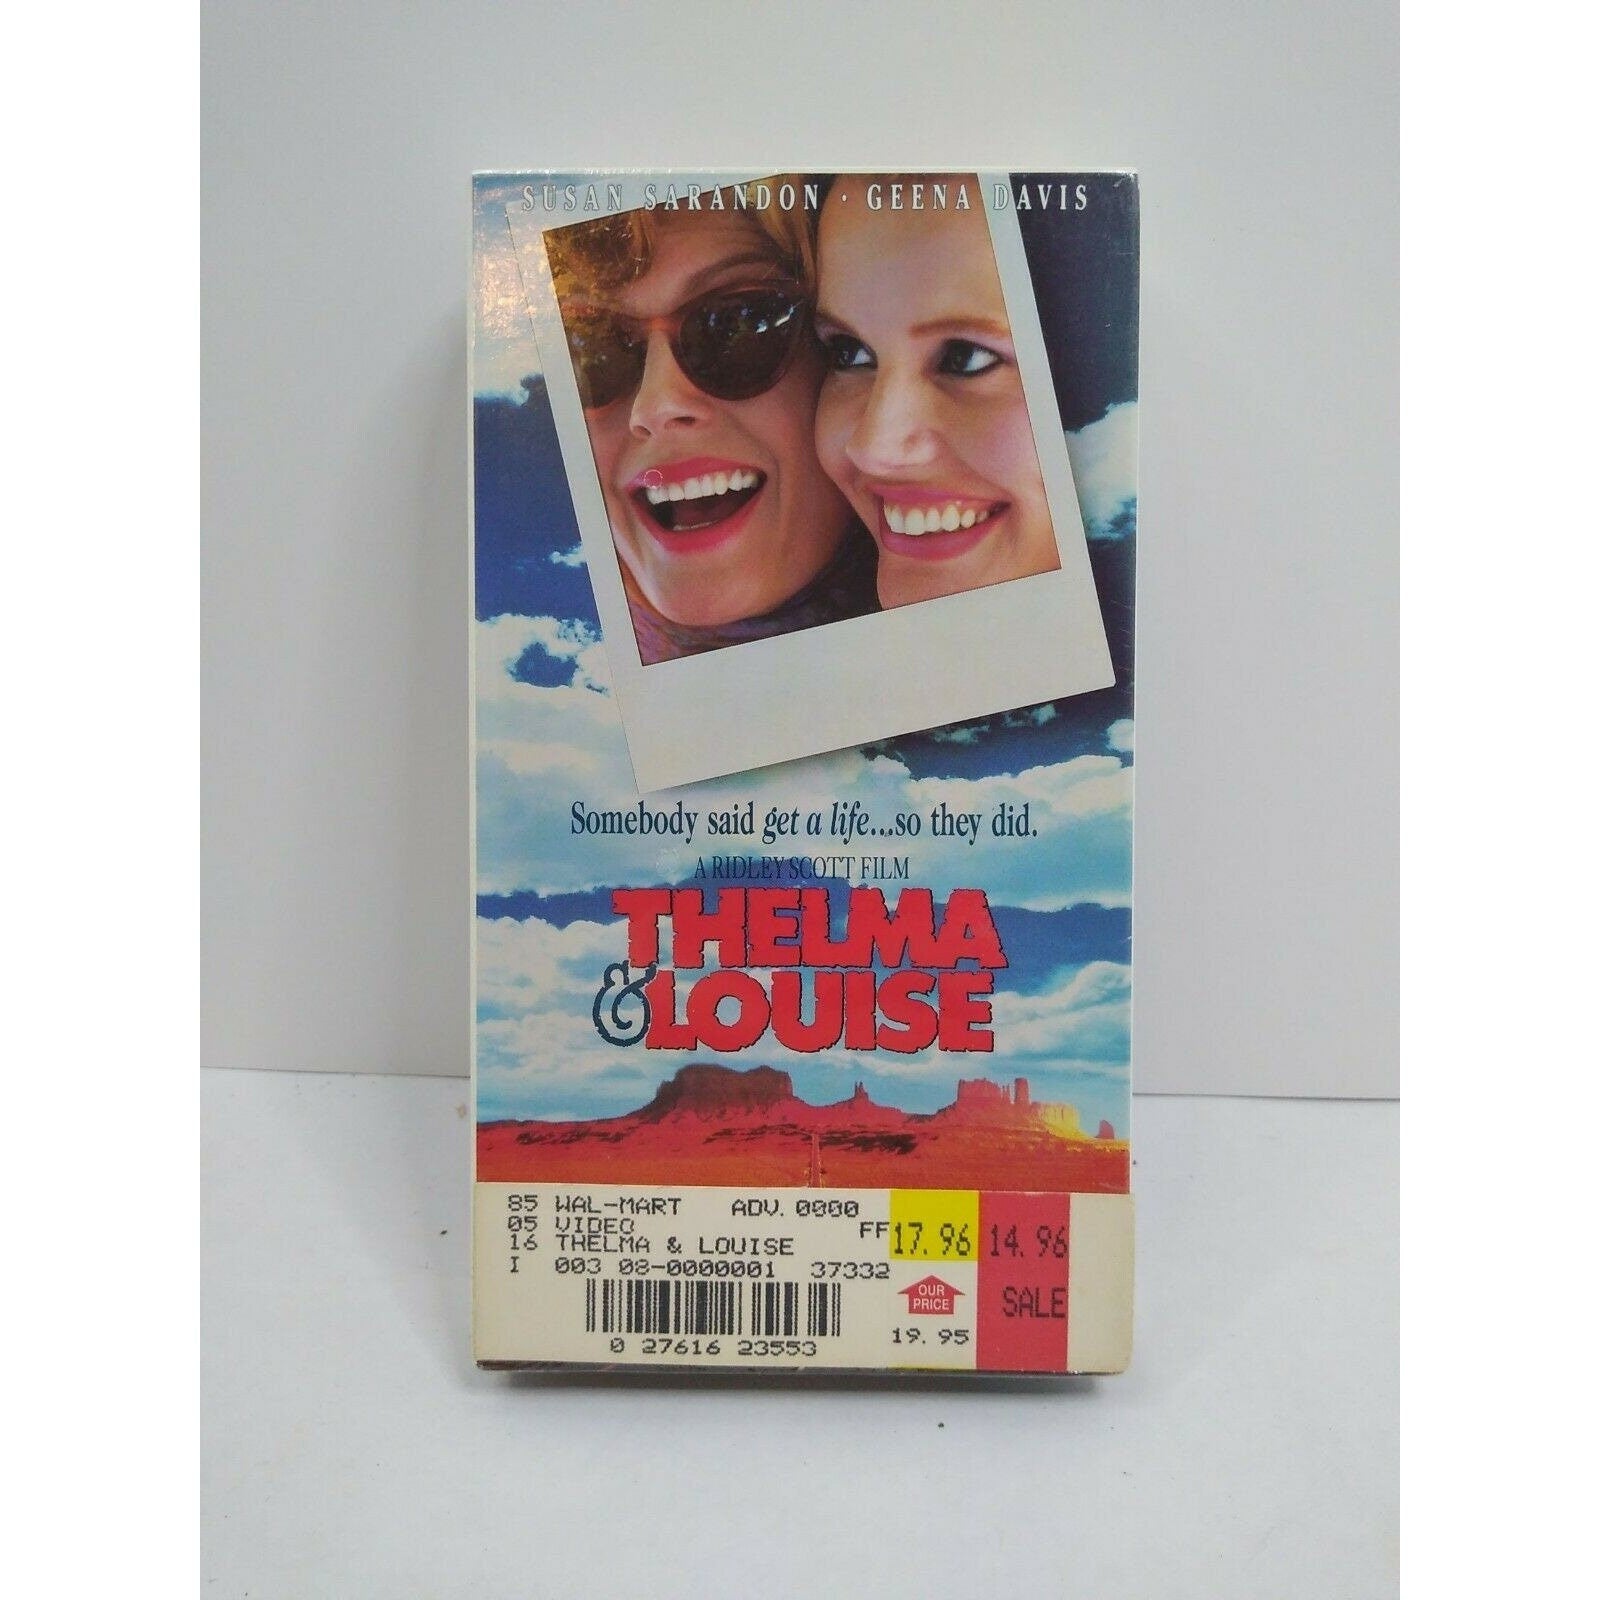 Thelma Louise (VHS, 1992, Contemporary Classics) - New Sealed